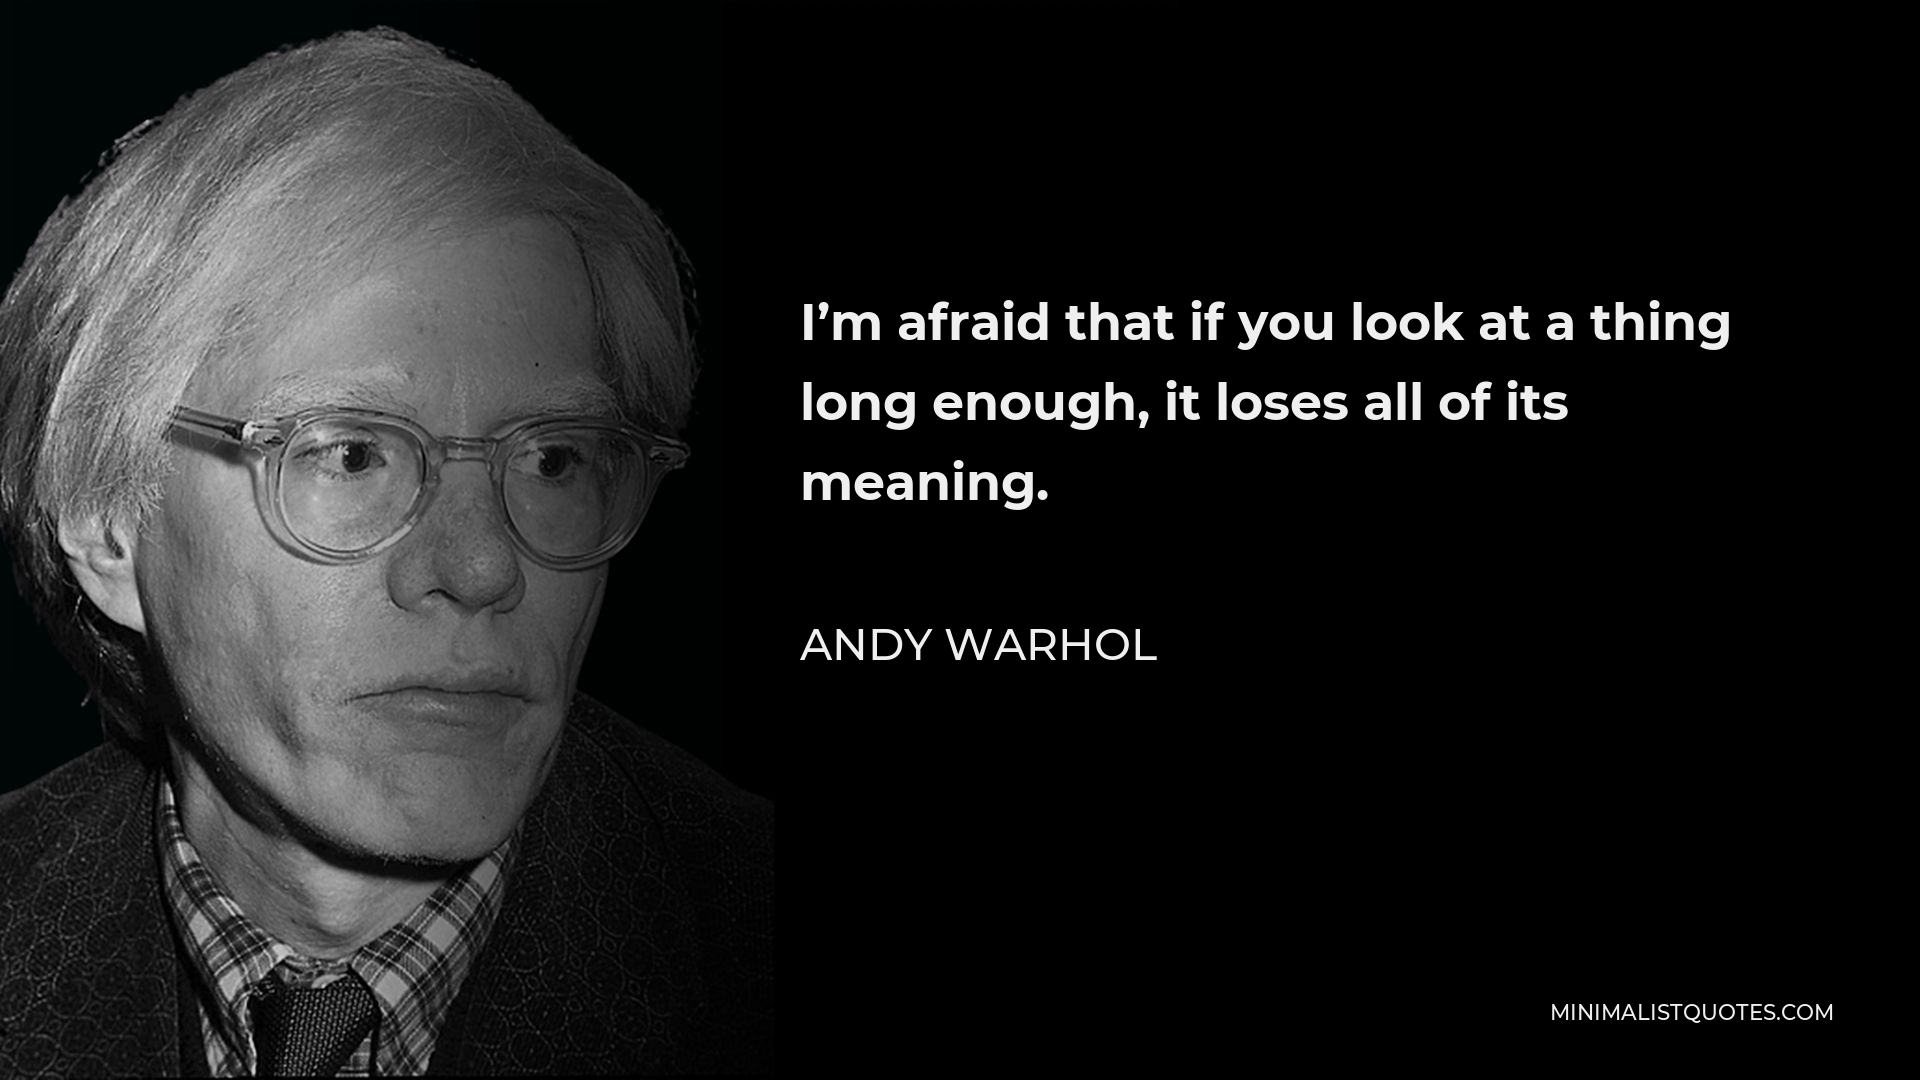 Andy Warhol Quote - I’m afraid that if you look at a thing long enough, it loses all of its meaning.